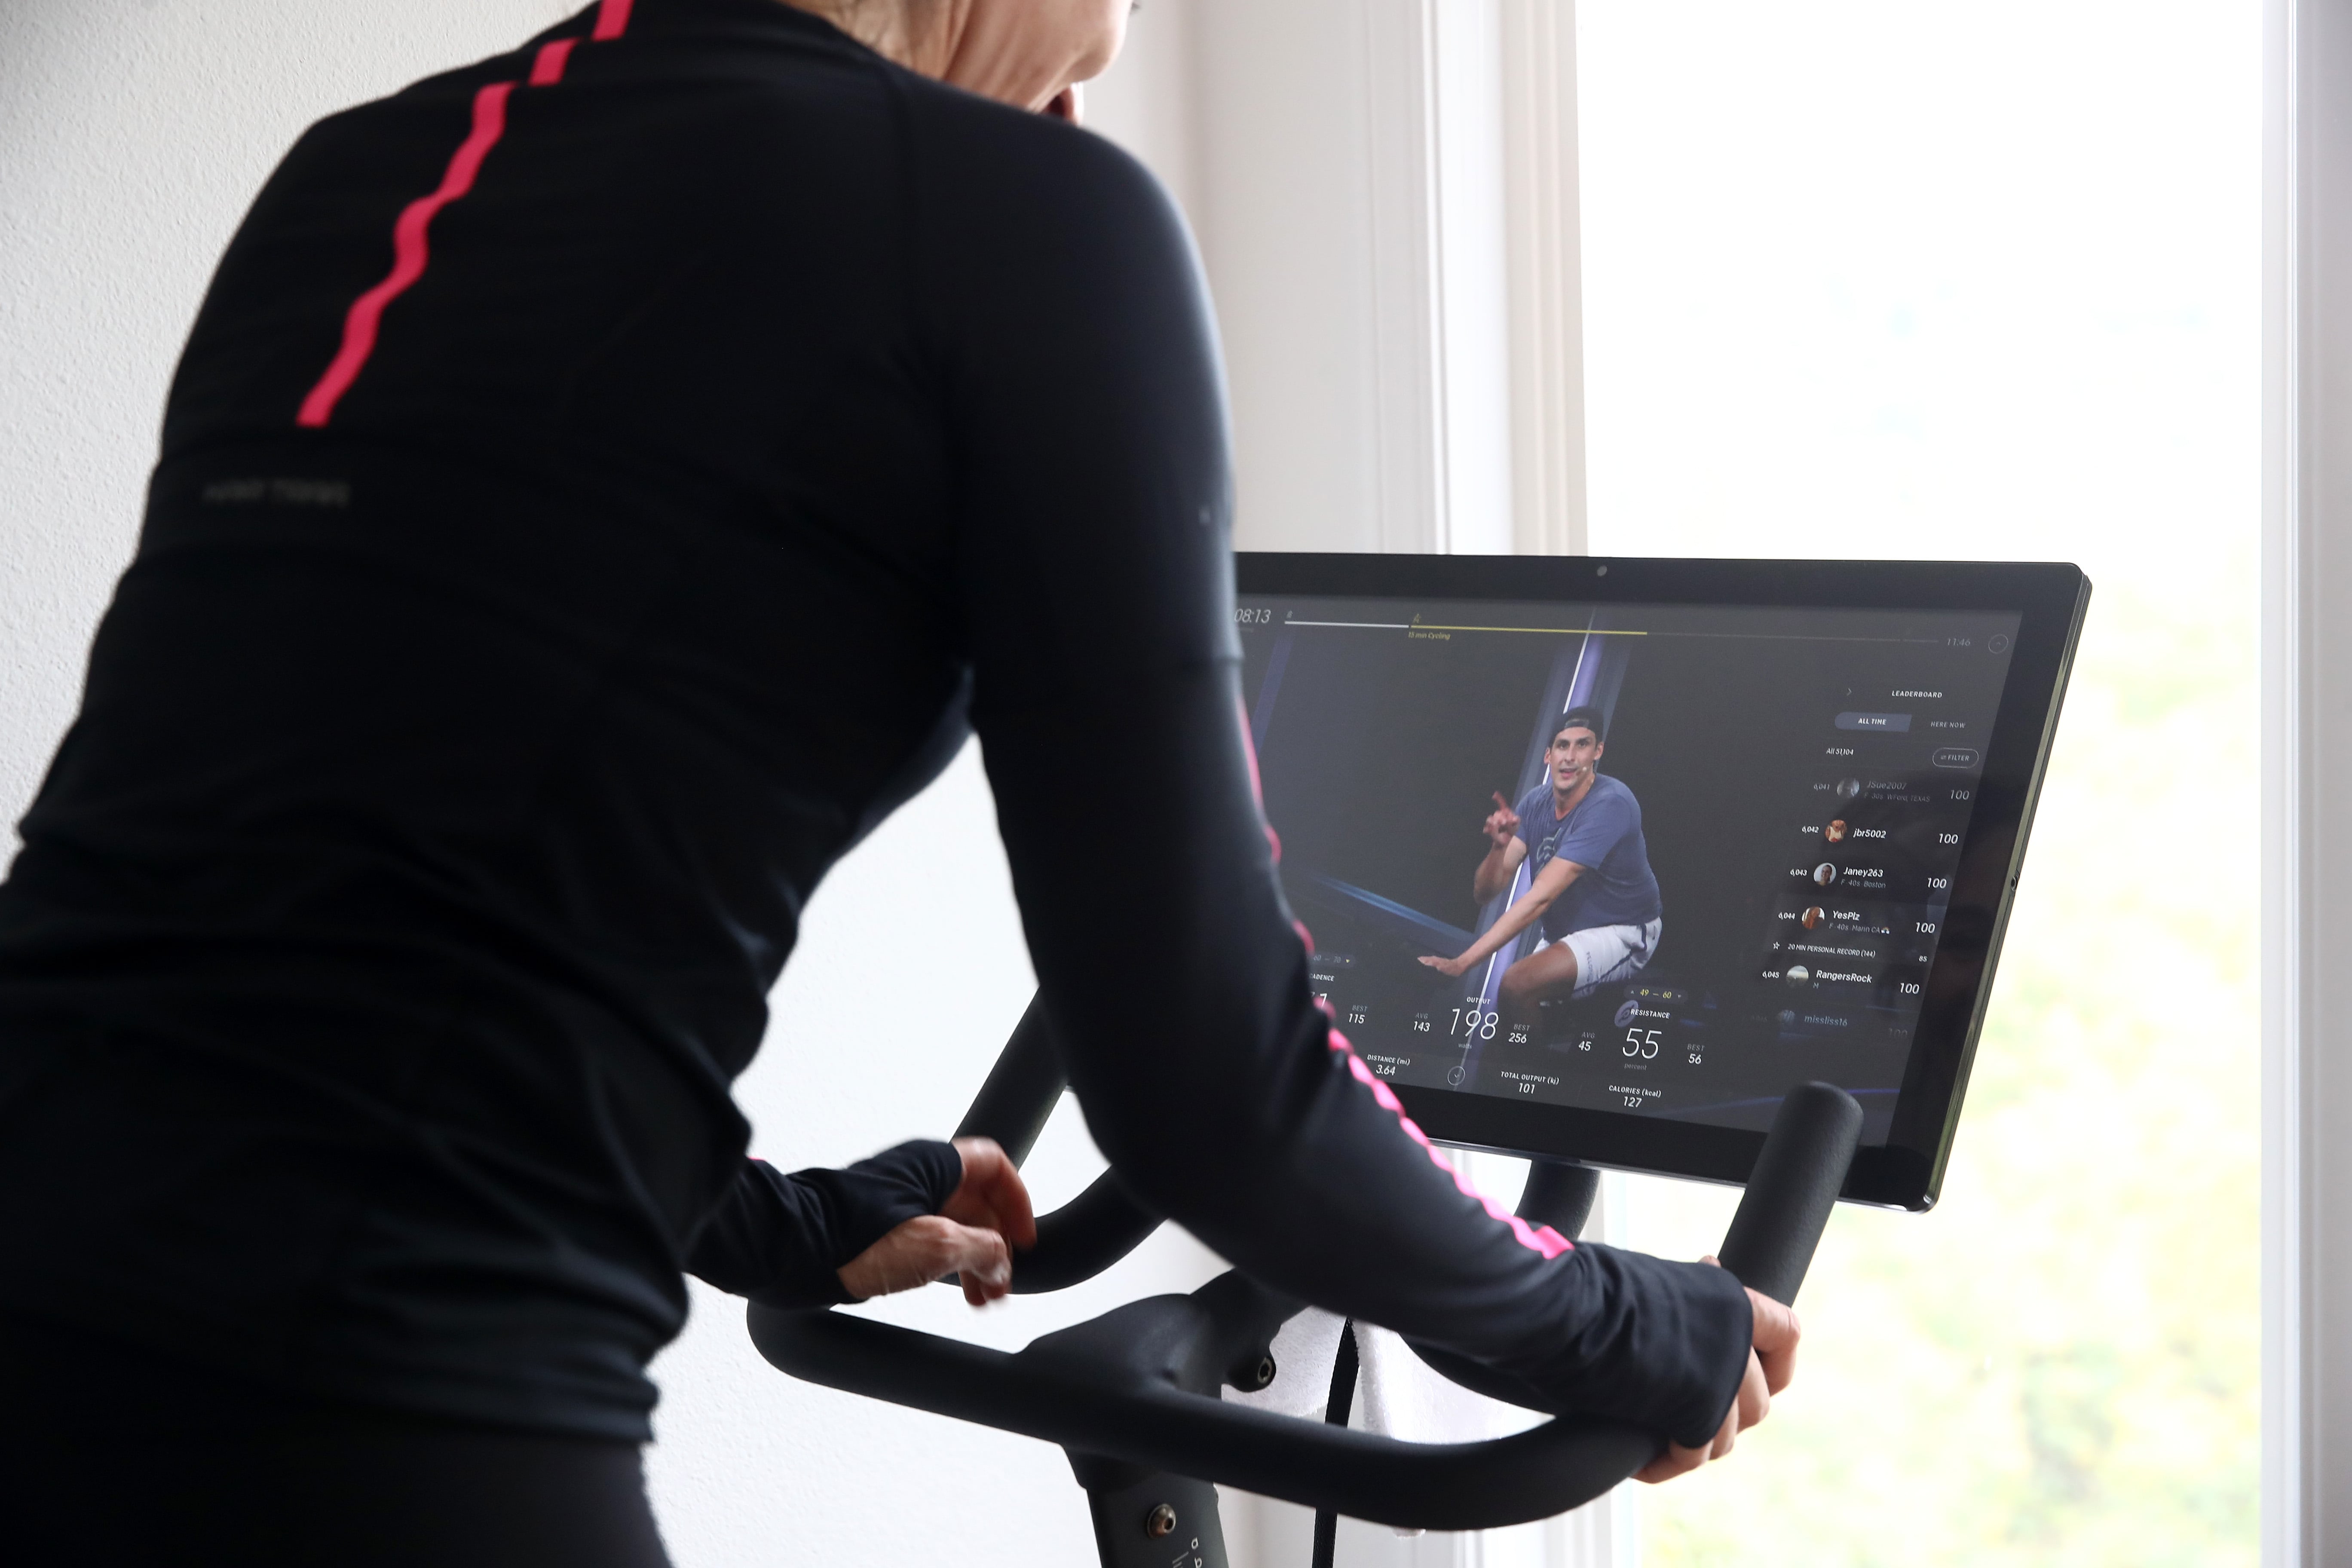 How to Connect Your AirPods to Your Peloton